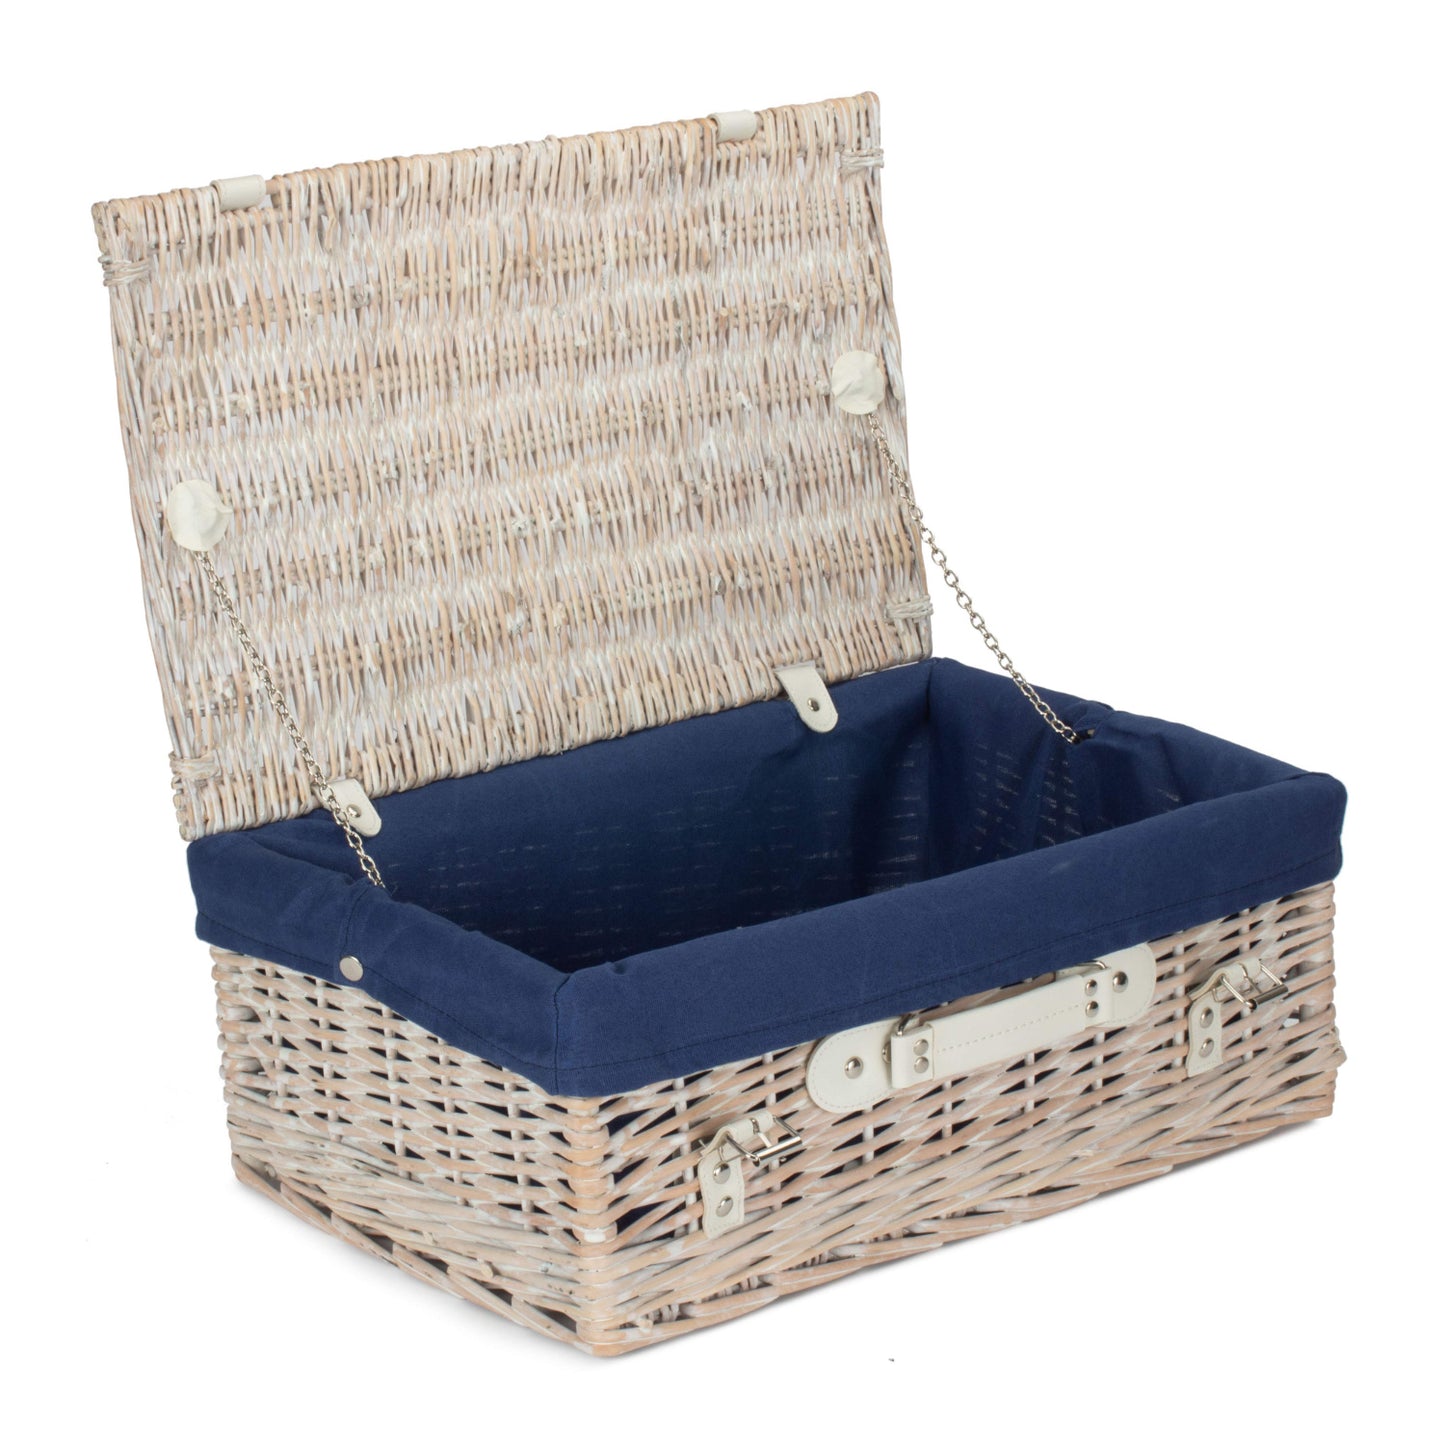 18 Inch White Hamper With Navy Blue Lining